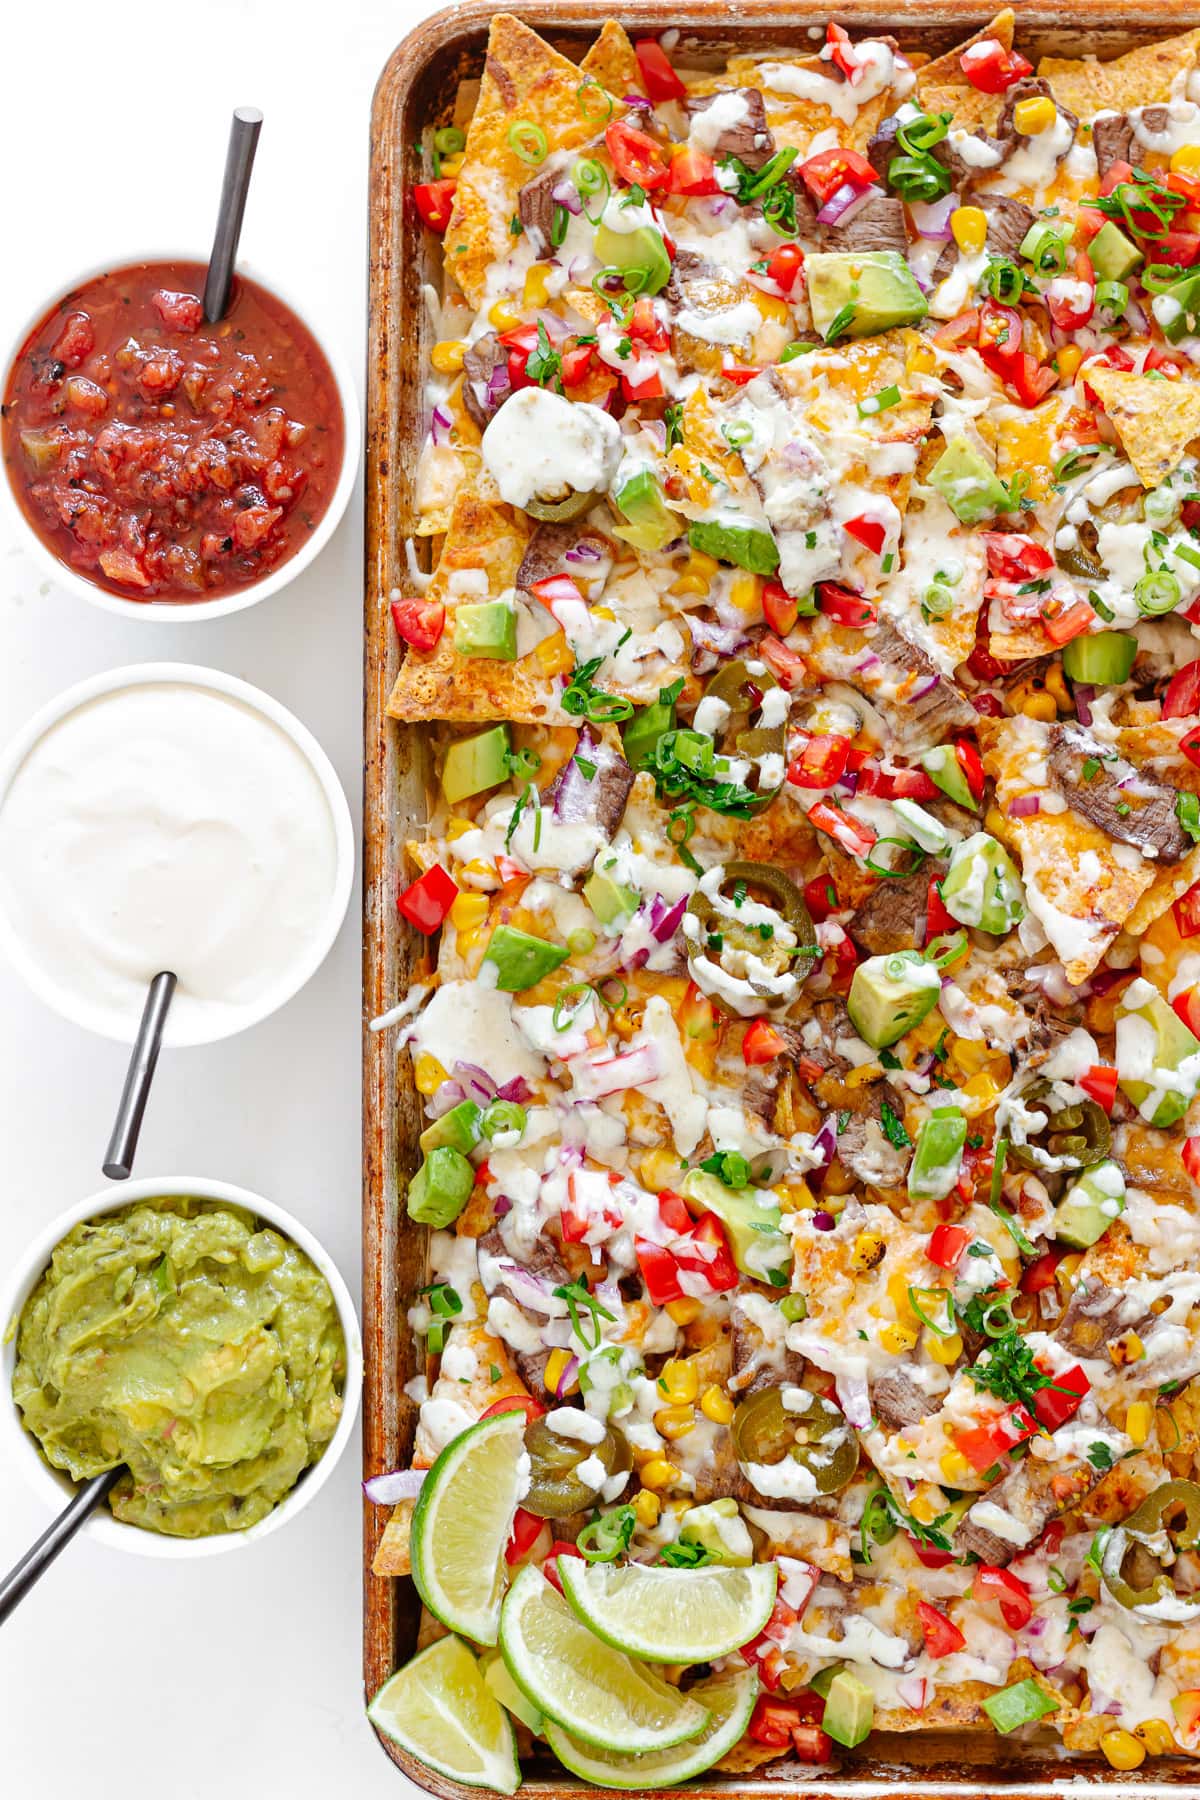 Steak nachos on a sheet pan with small bowls of salsa, sour cream and guacamole beside it.